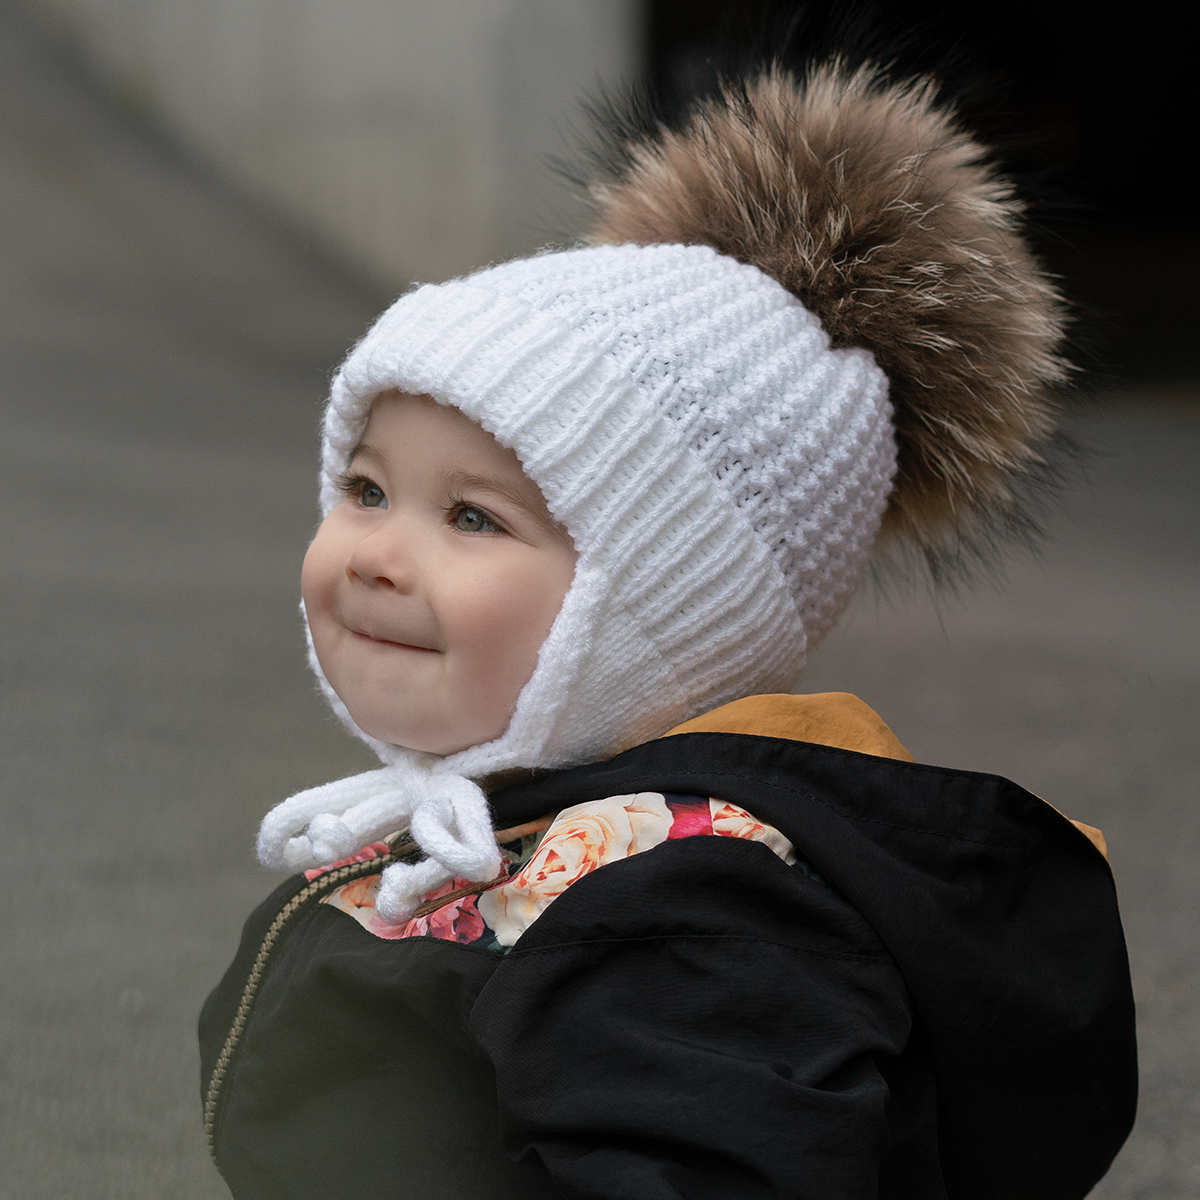 M Knitting Pattern - Nordic hat for baby